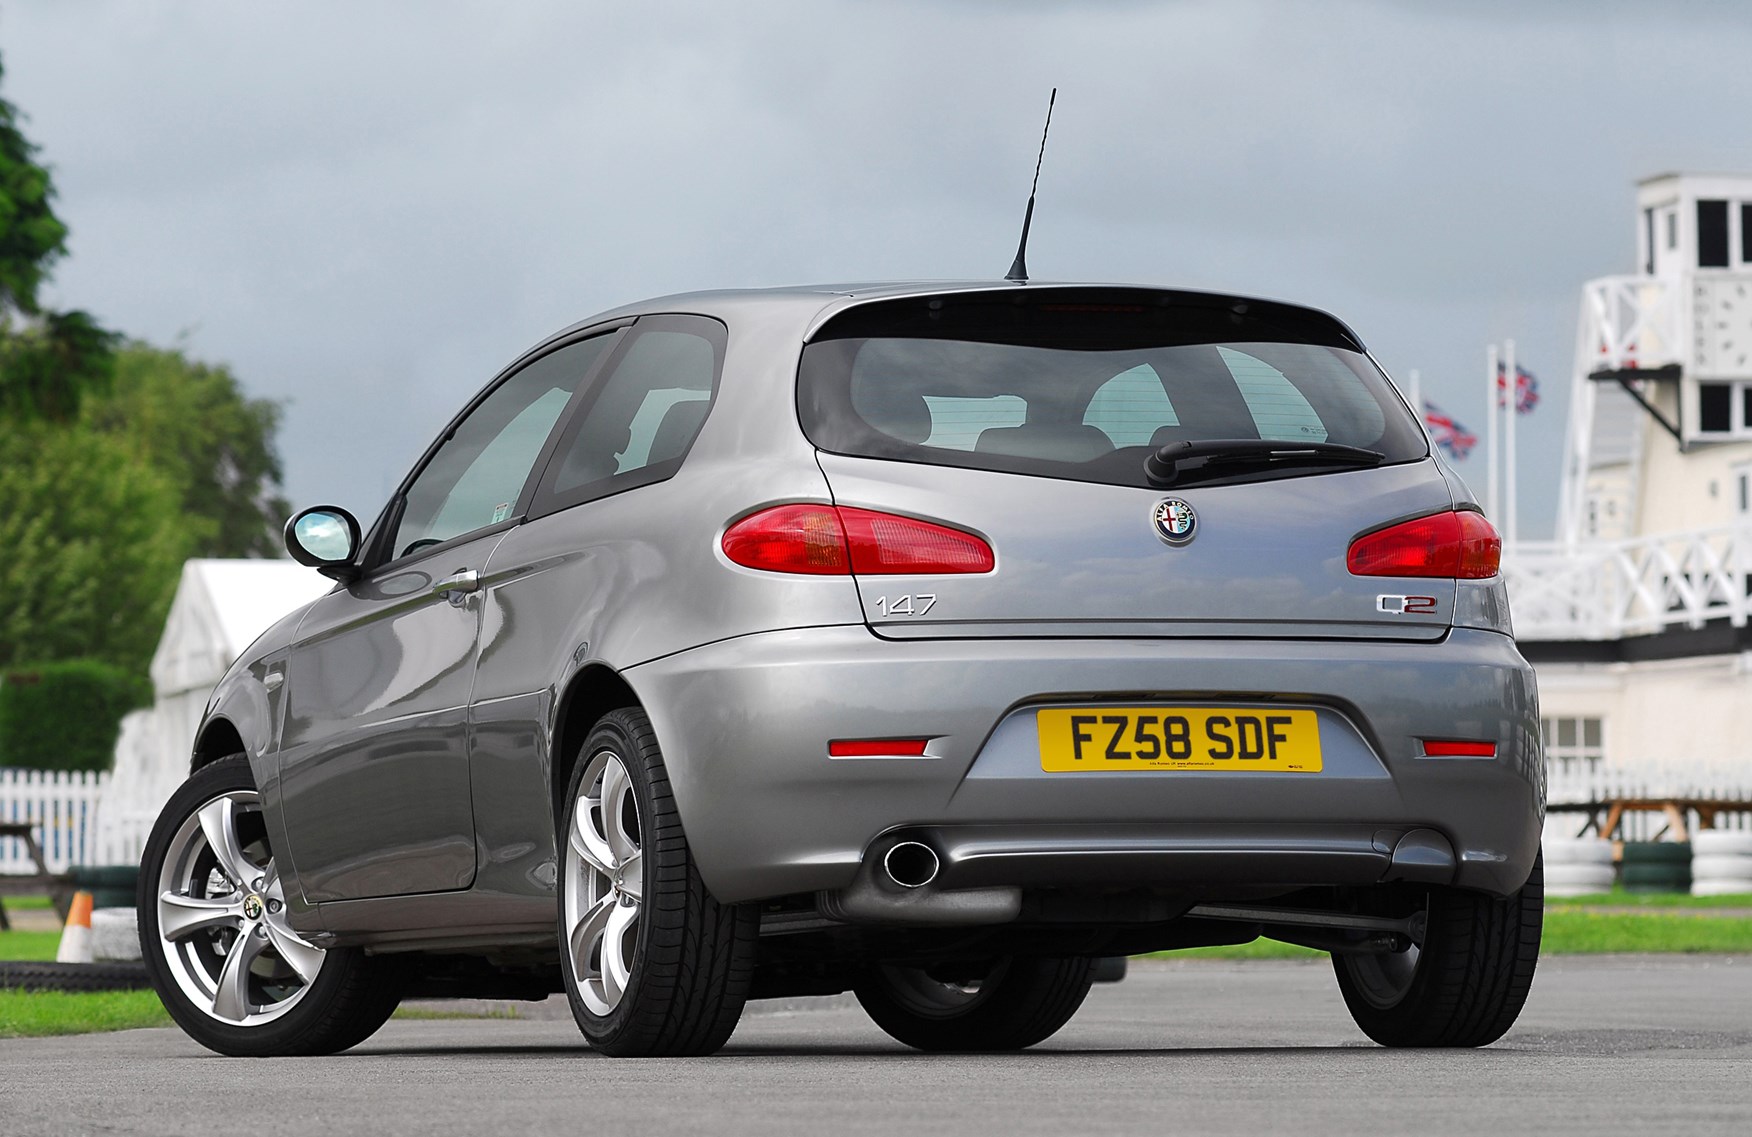 Used Alfa Romeo 147 Hatchback (2001 2009) Review Parkers